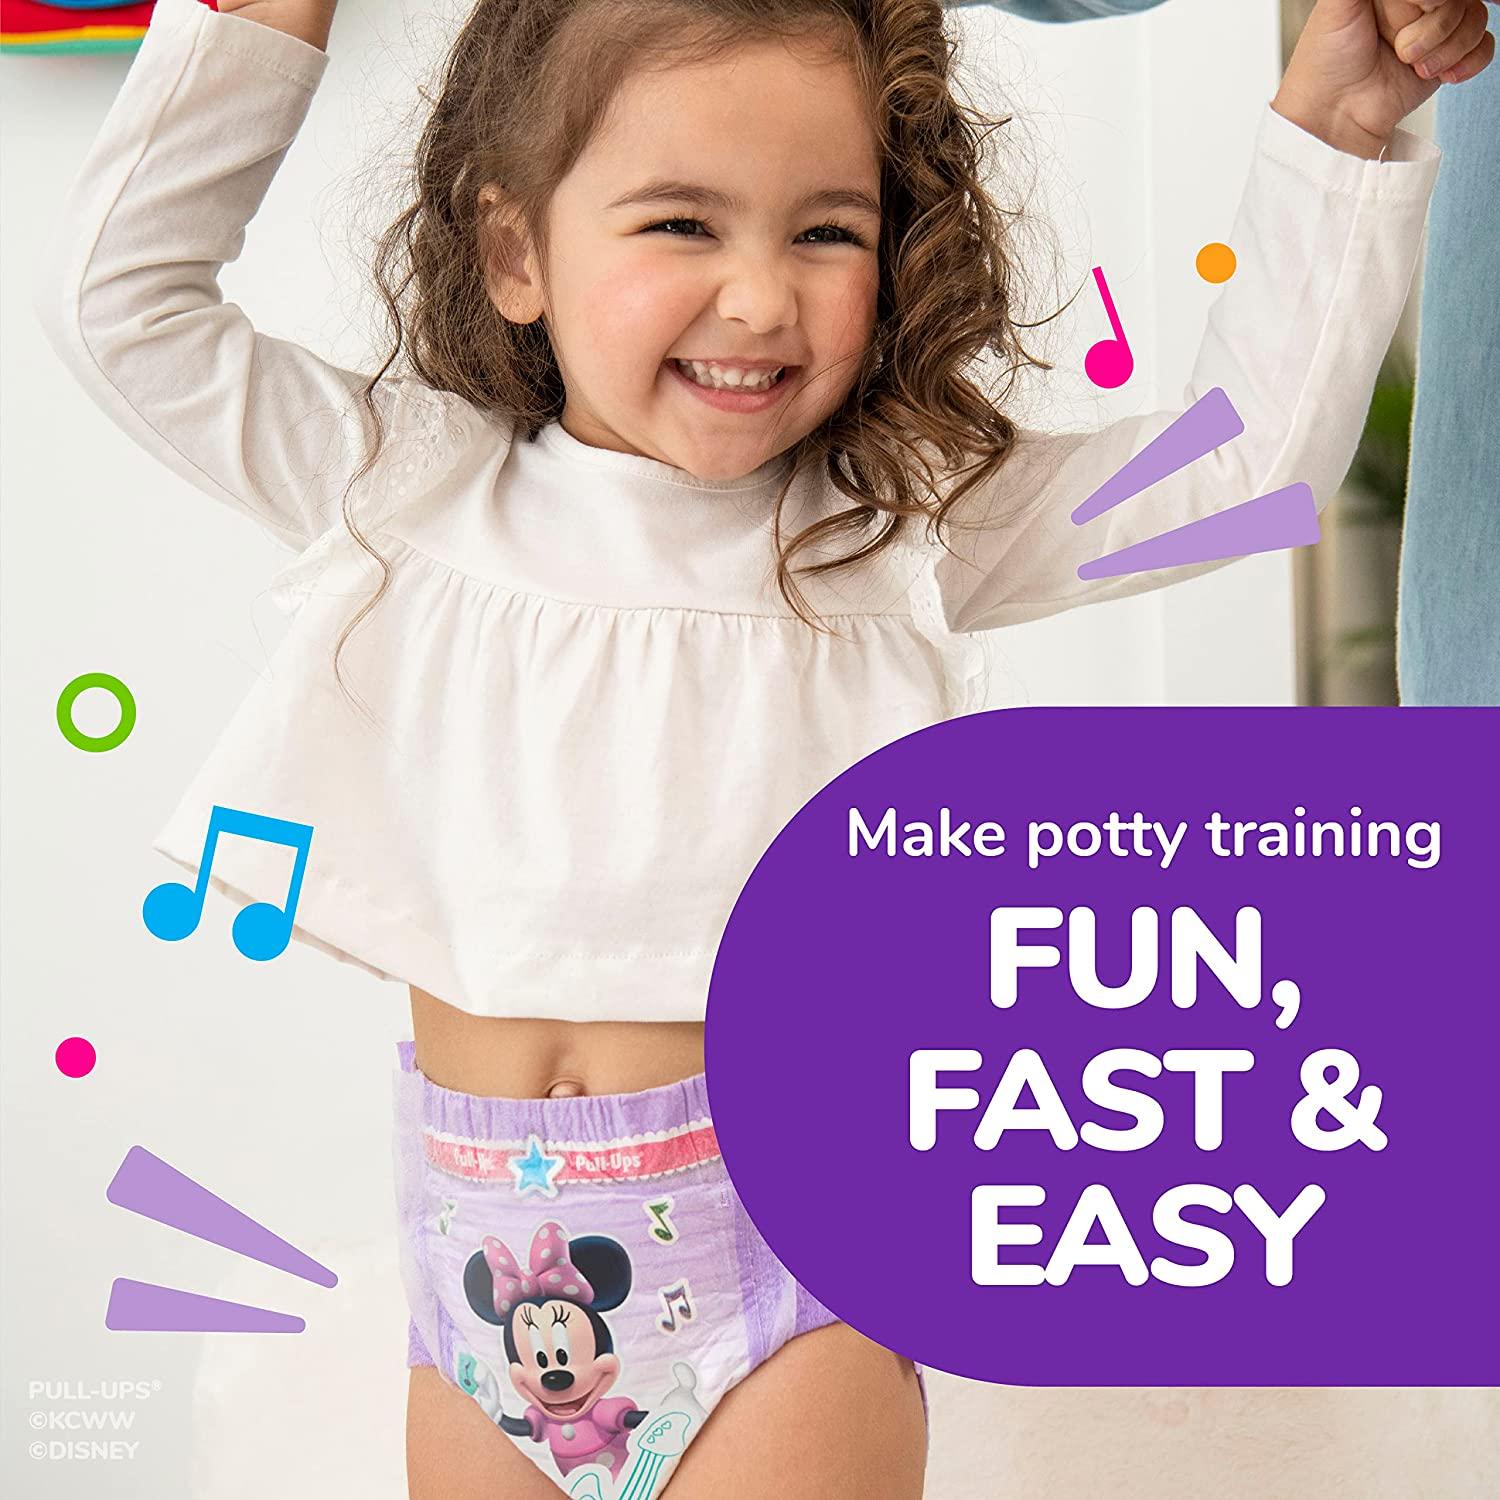 Pull-Ups New Leaf Potty Training Pants for Girls (Size: 2T-5T)